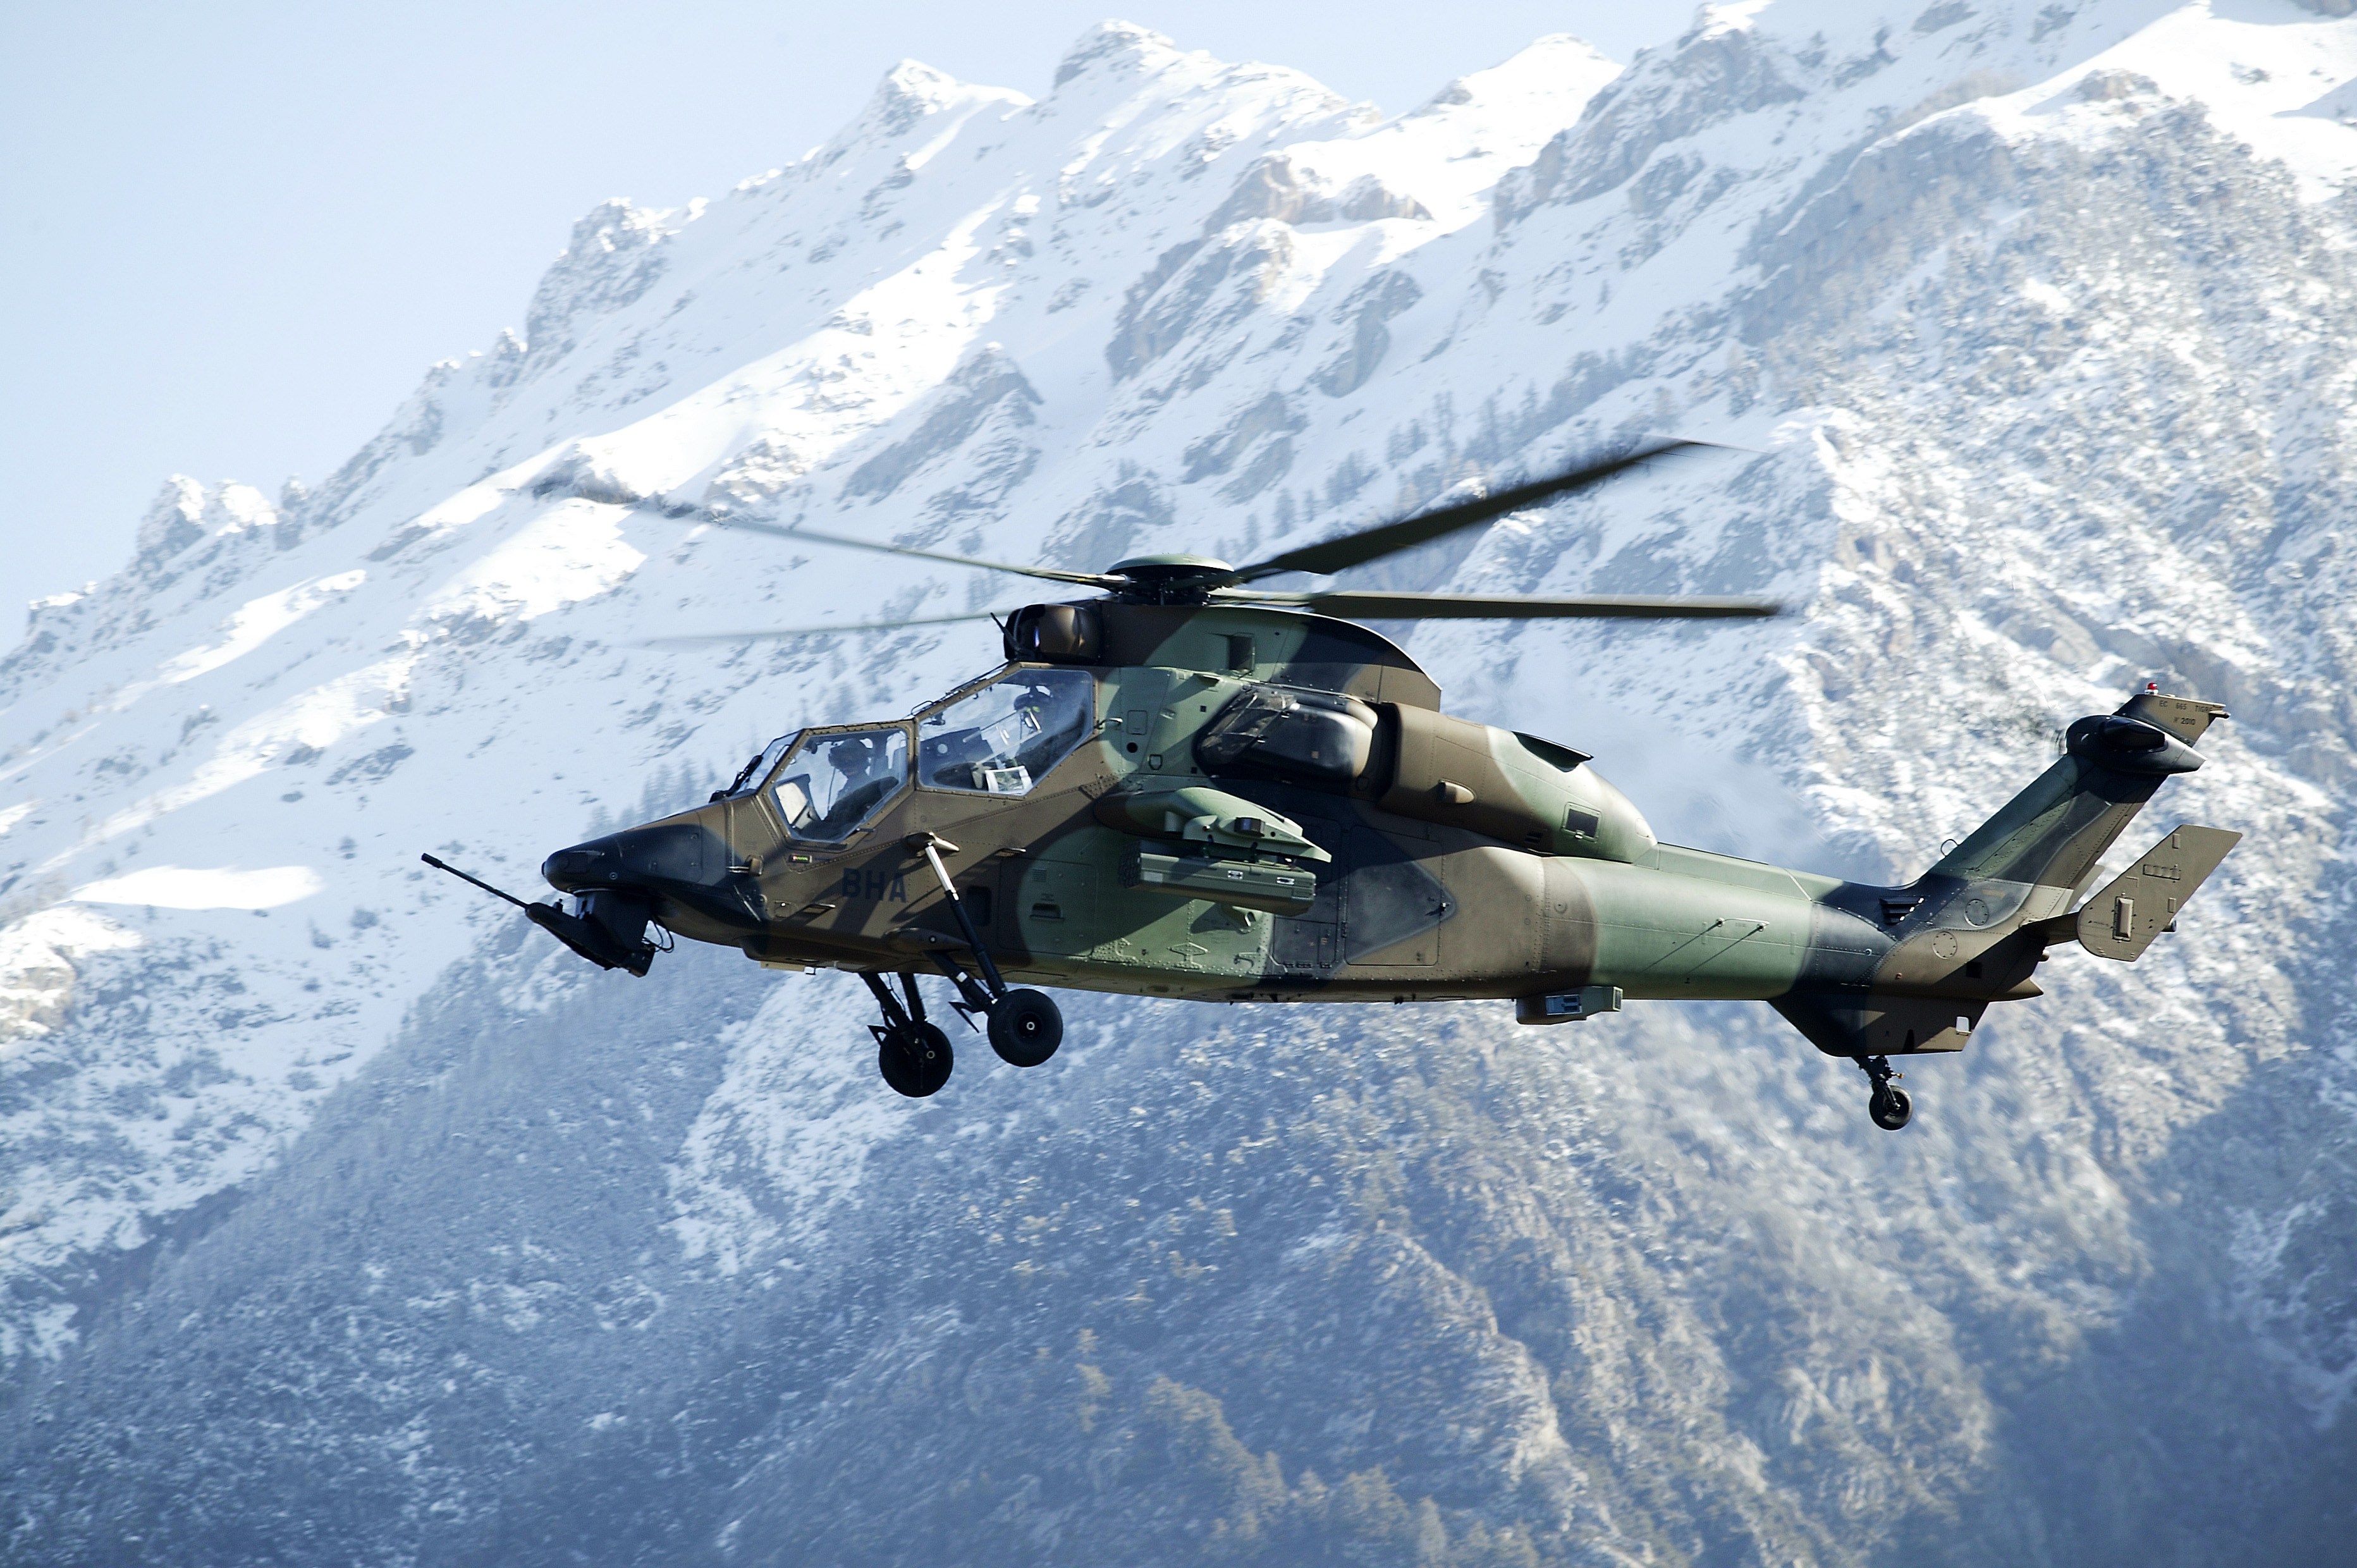 eurocopter tiger, military, attack helicopter, helicopter, military helicopters